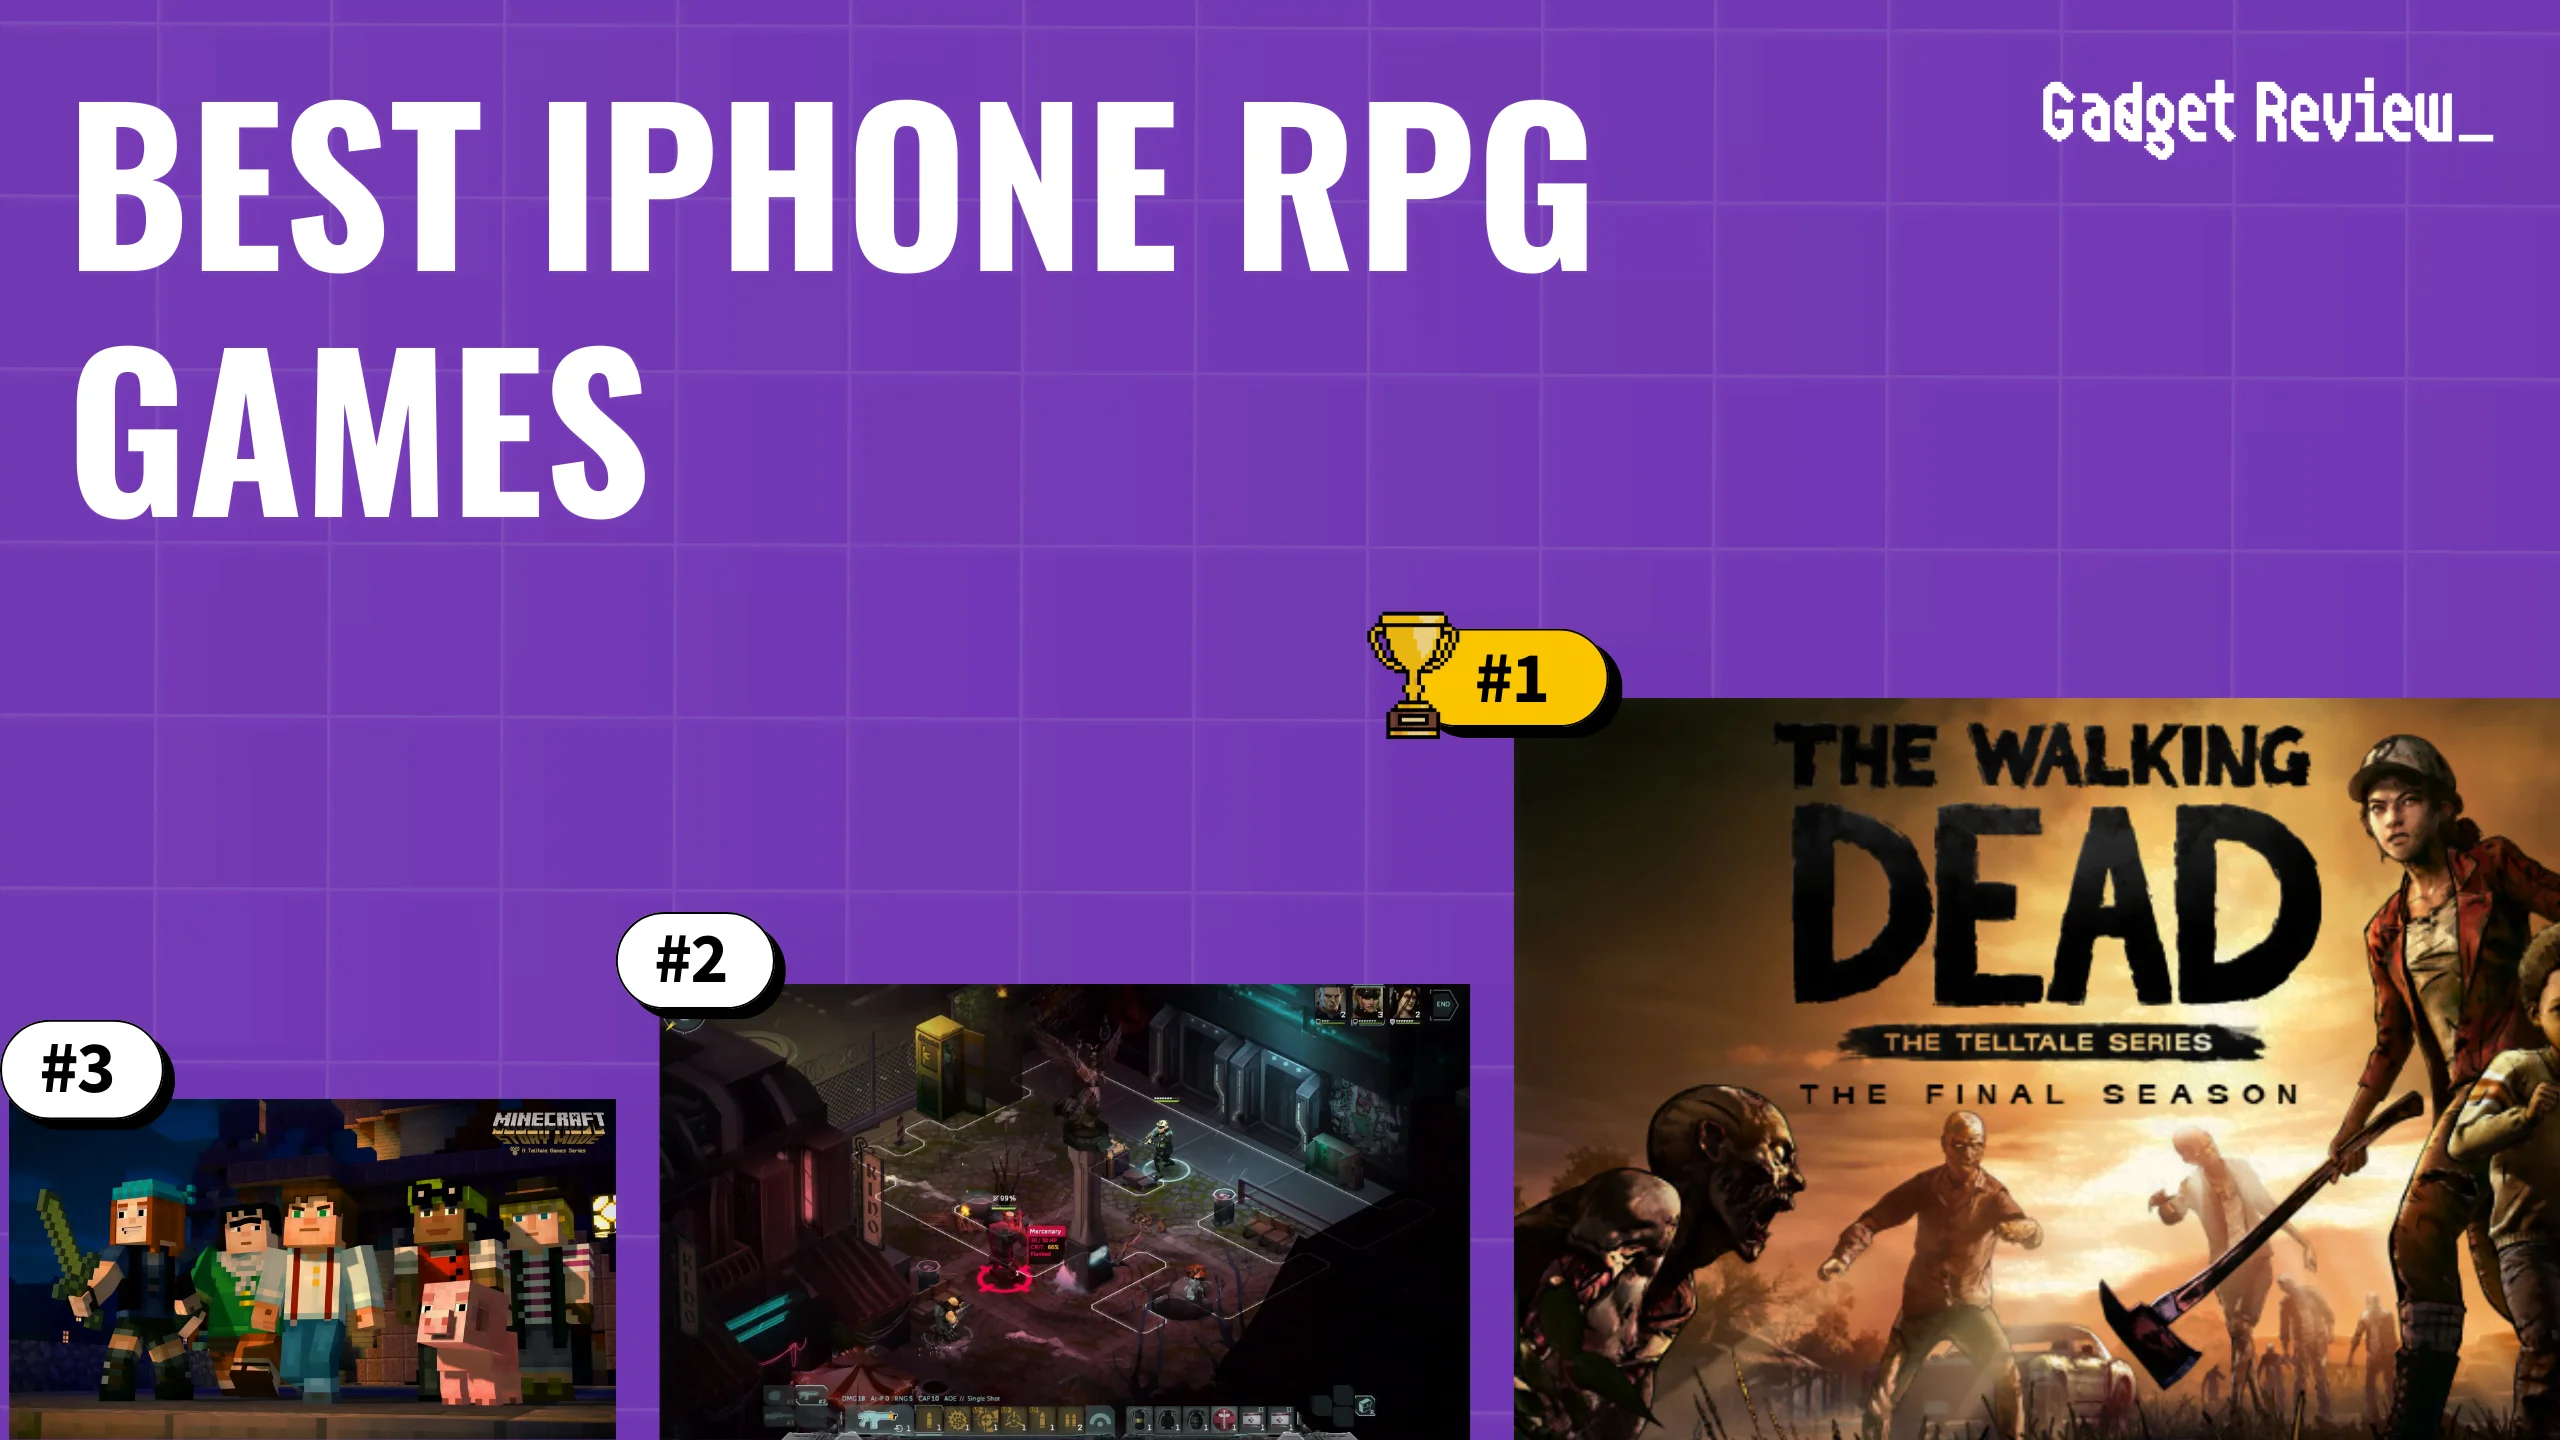 Best RPG Games for iPhone